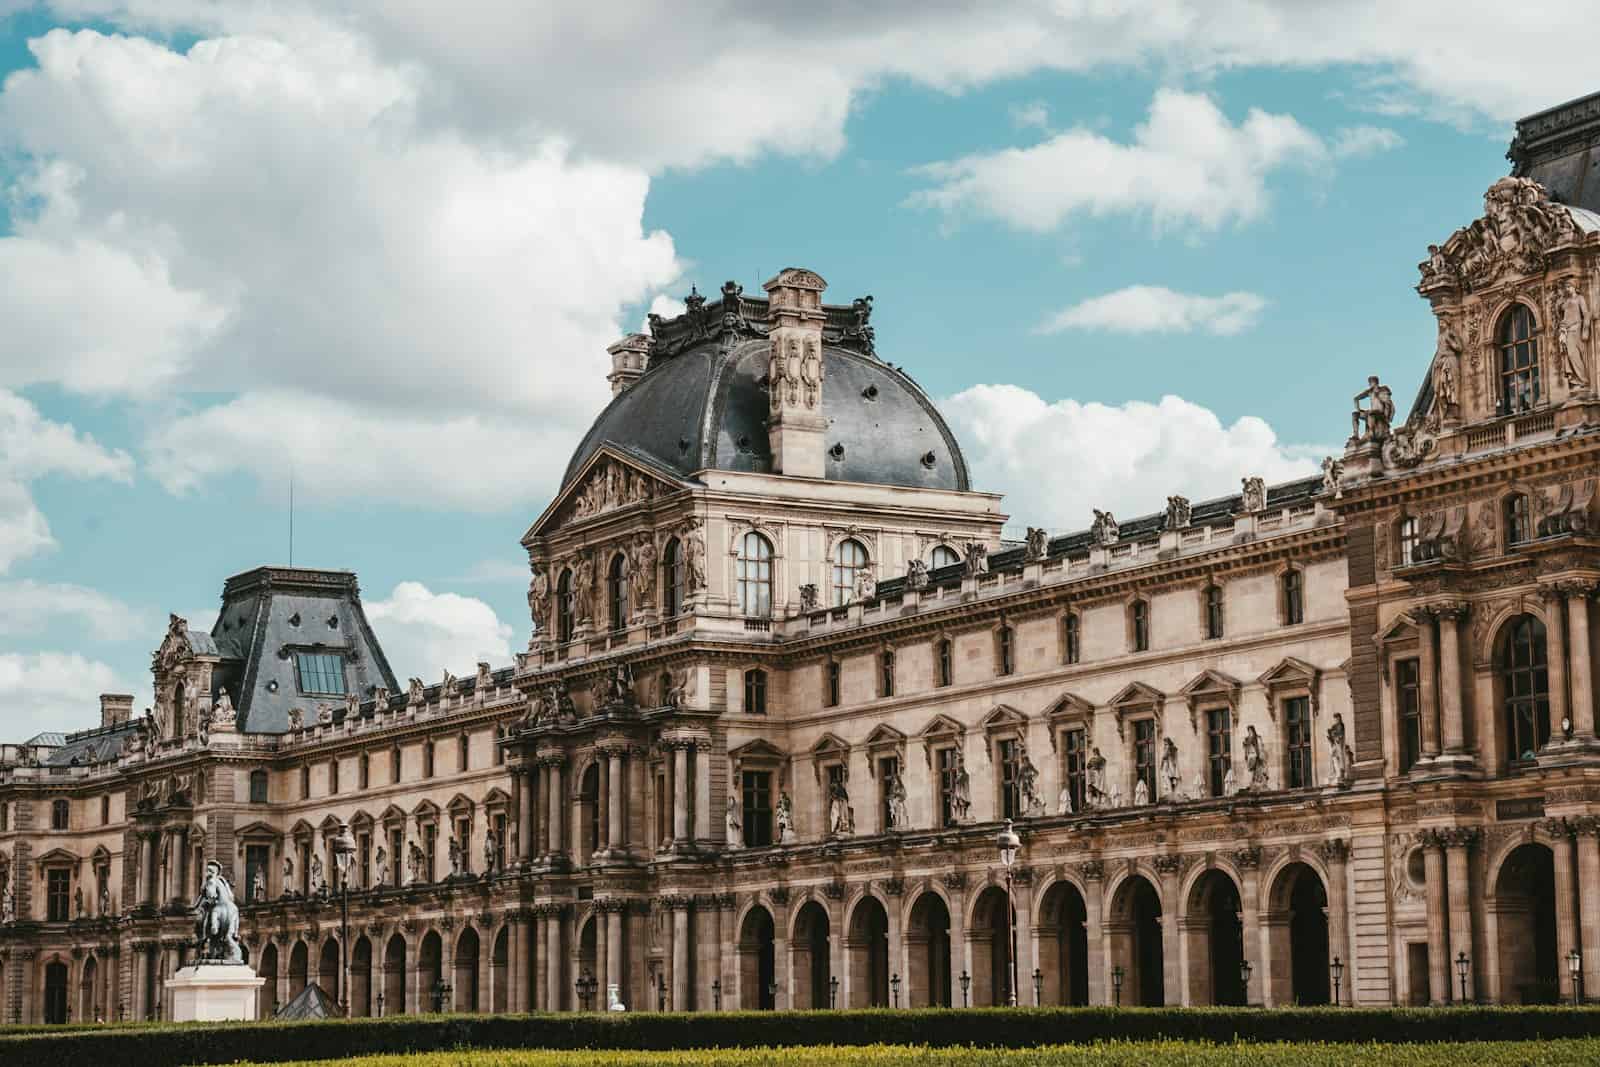 The exterior of the Louvre on a partly cloudy day. 